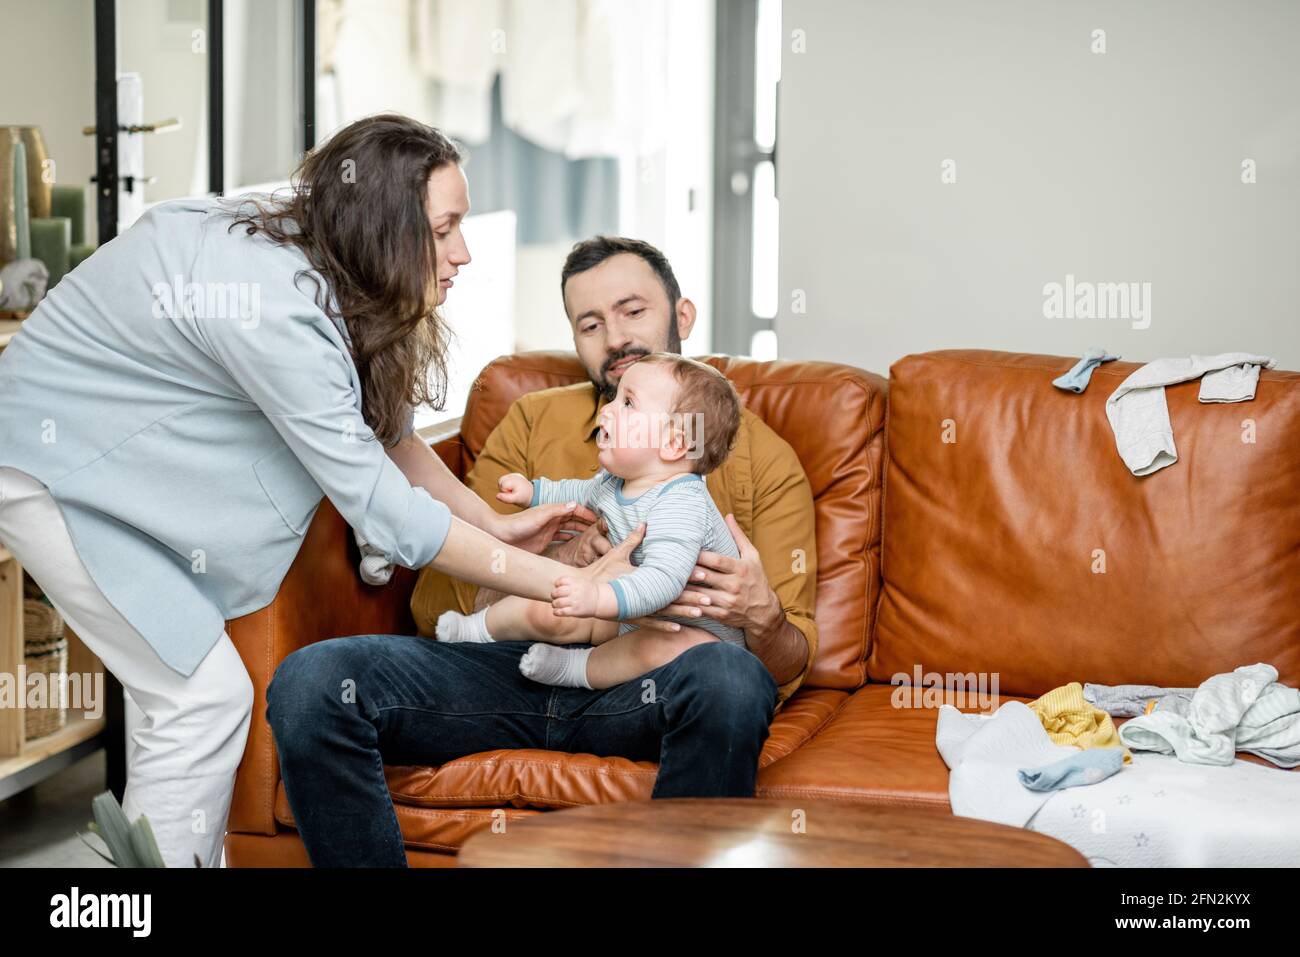 Mother takes a newborn baby nursed by dad at home, hugs and kisses. Parenthood and raising a baby concept. Stock Photo